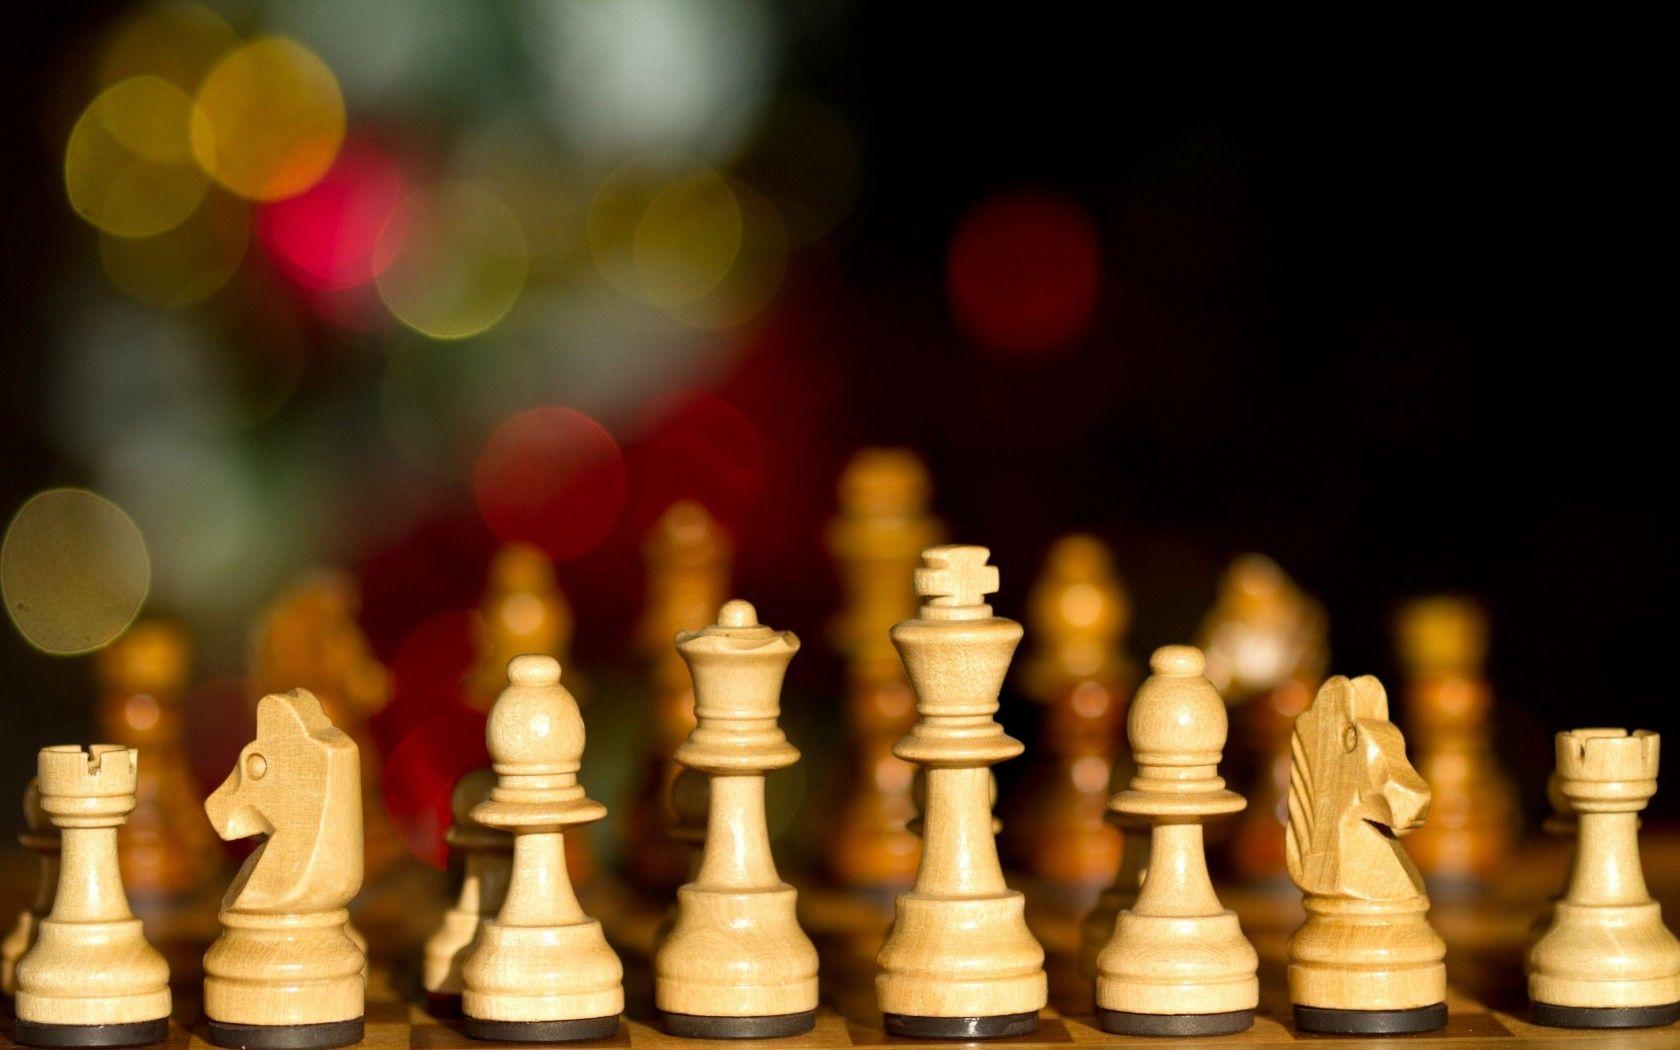 Chess Wallpaper, High Quality Image of Chess in Amazing Collection